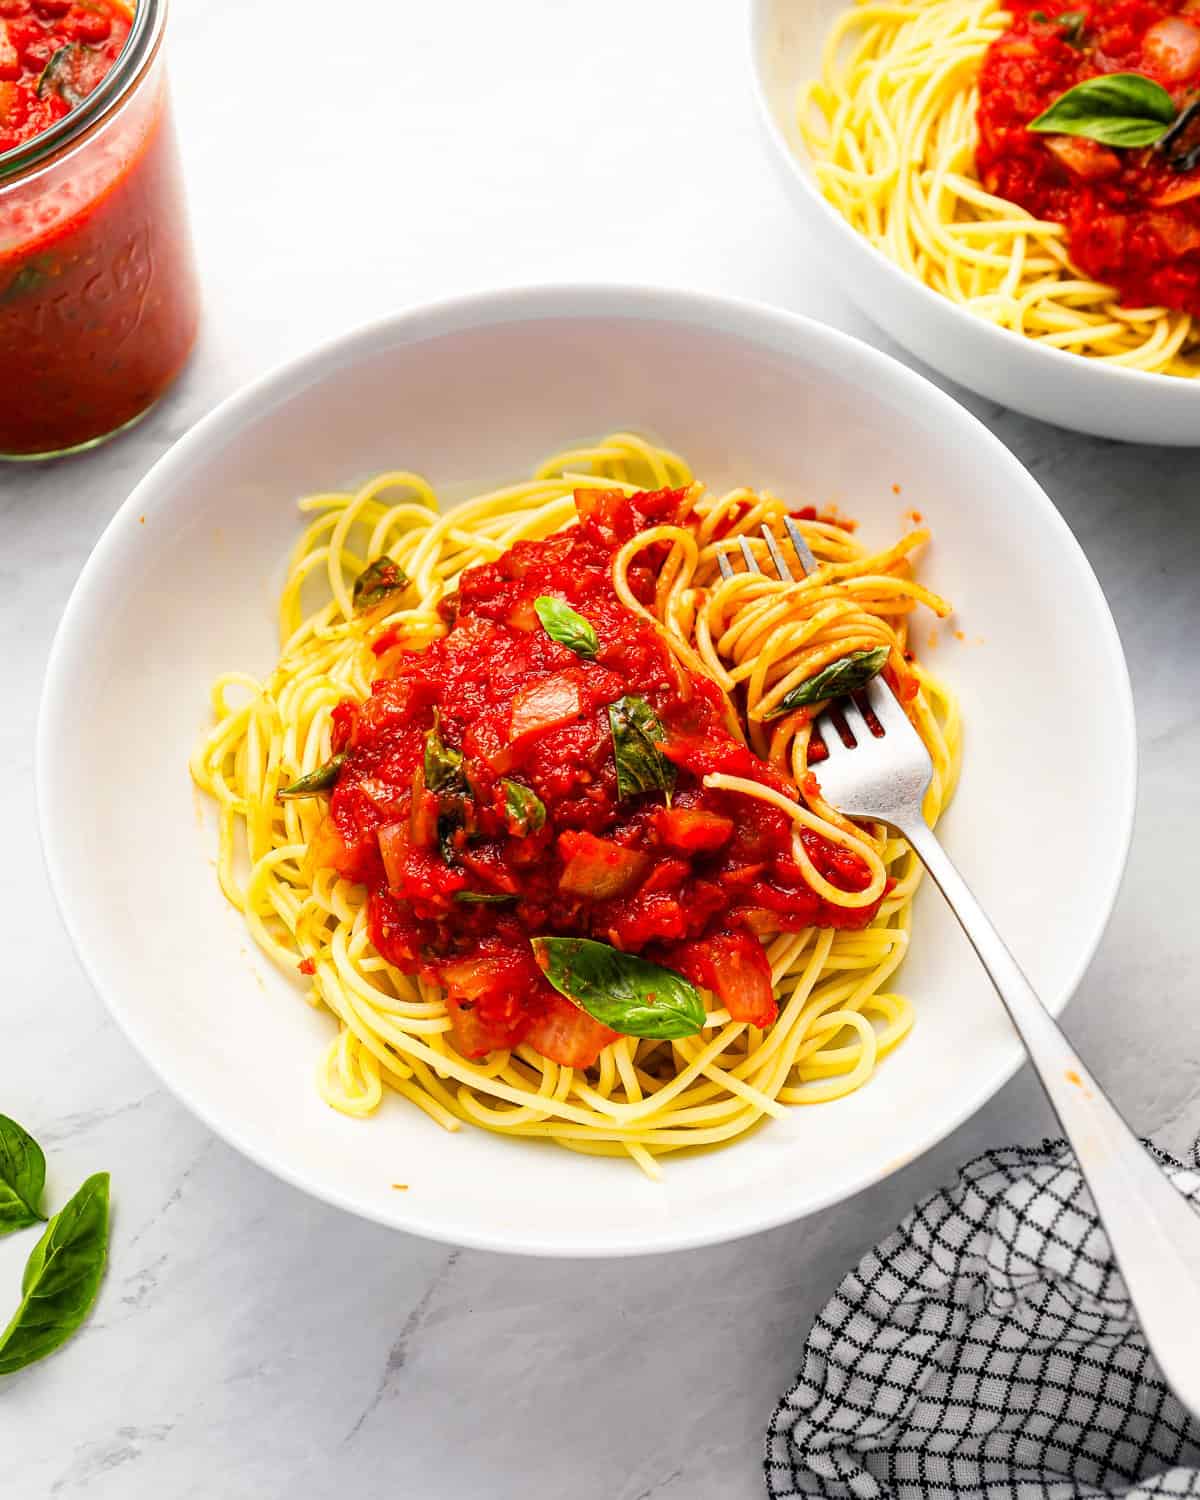 A bowl of spaghetti with tomato sauce and a fork.